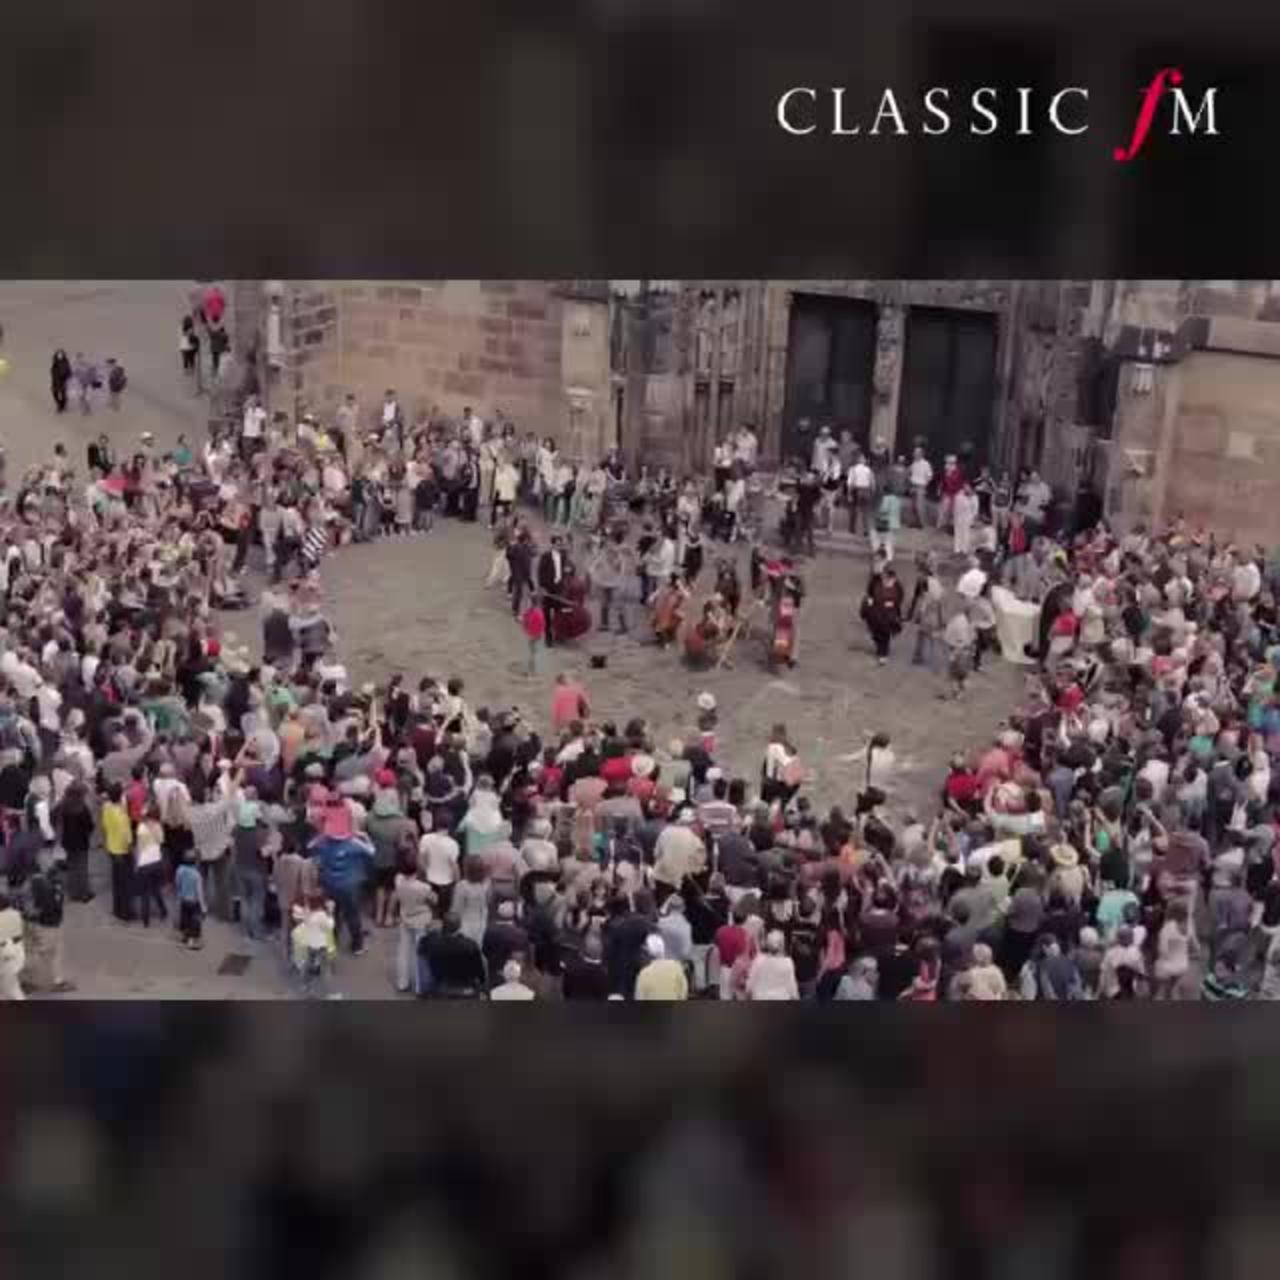 Classic music Flash mob in Germany